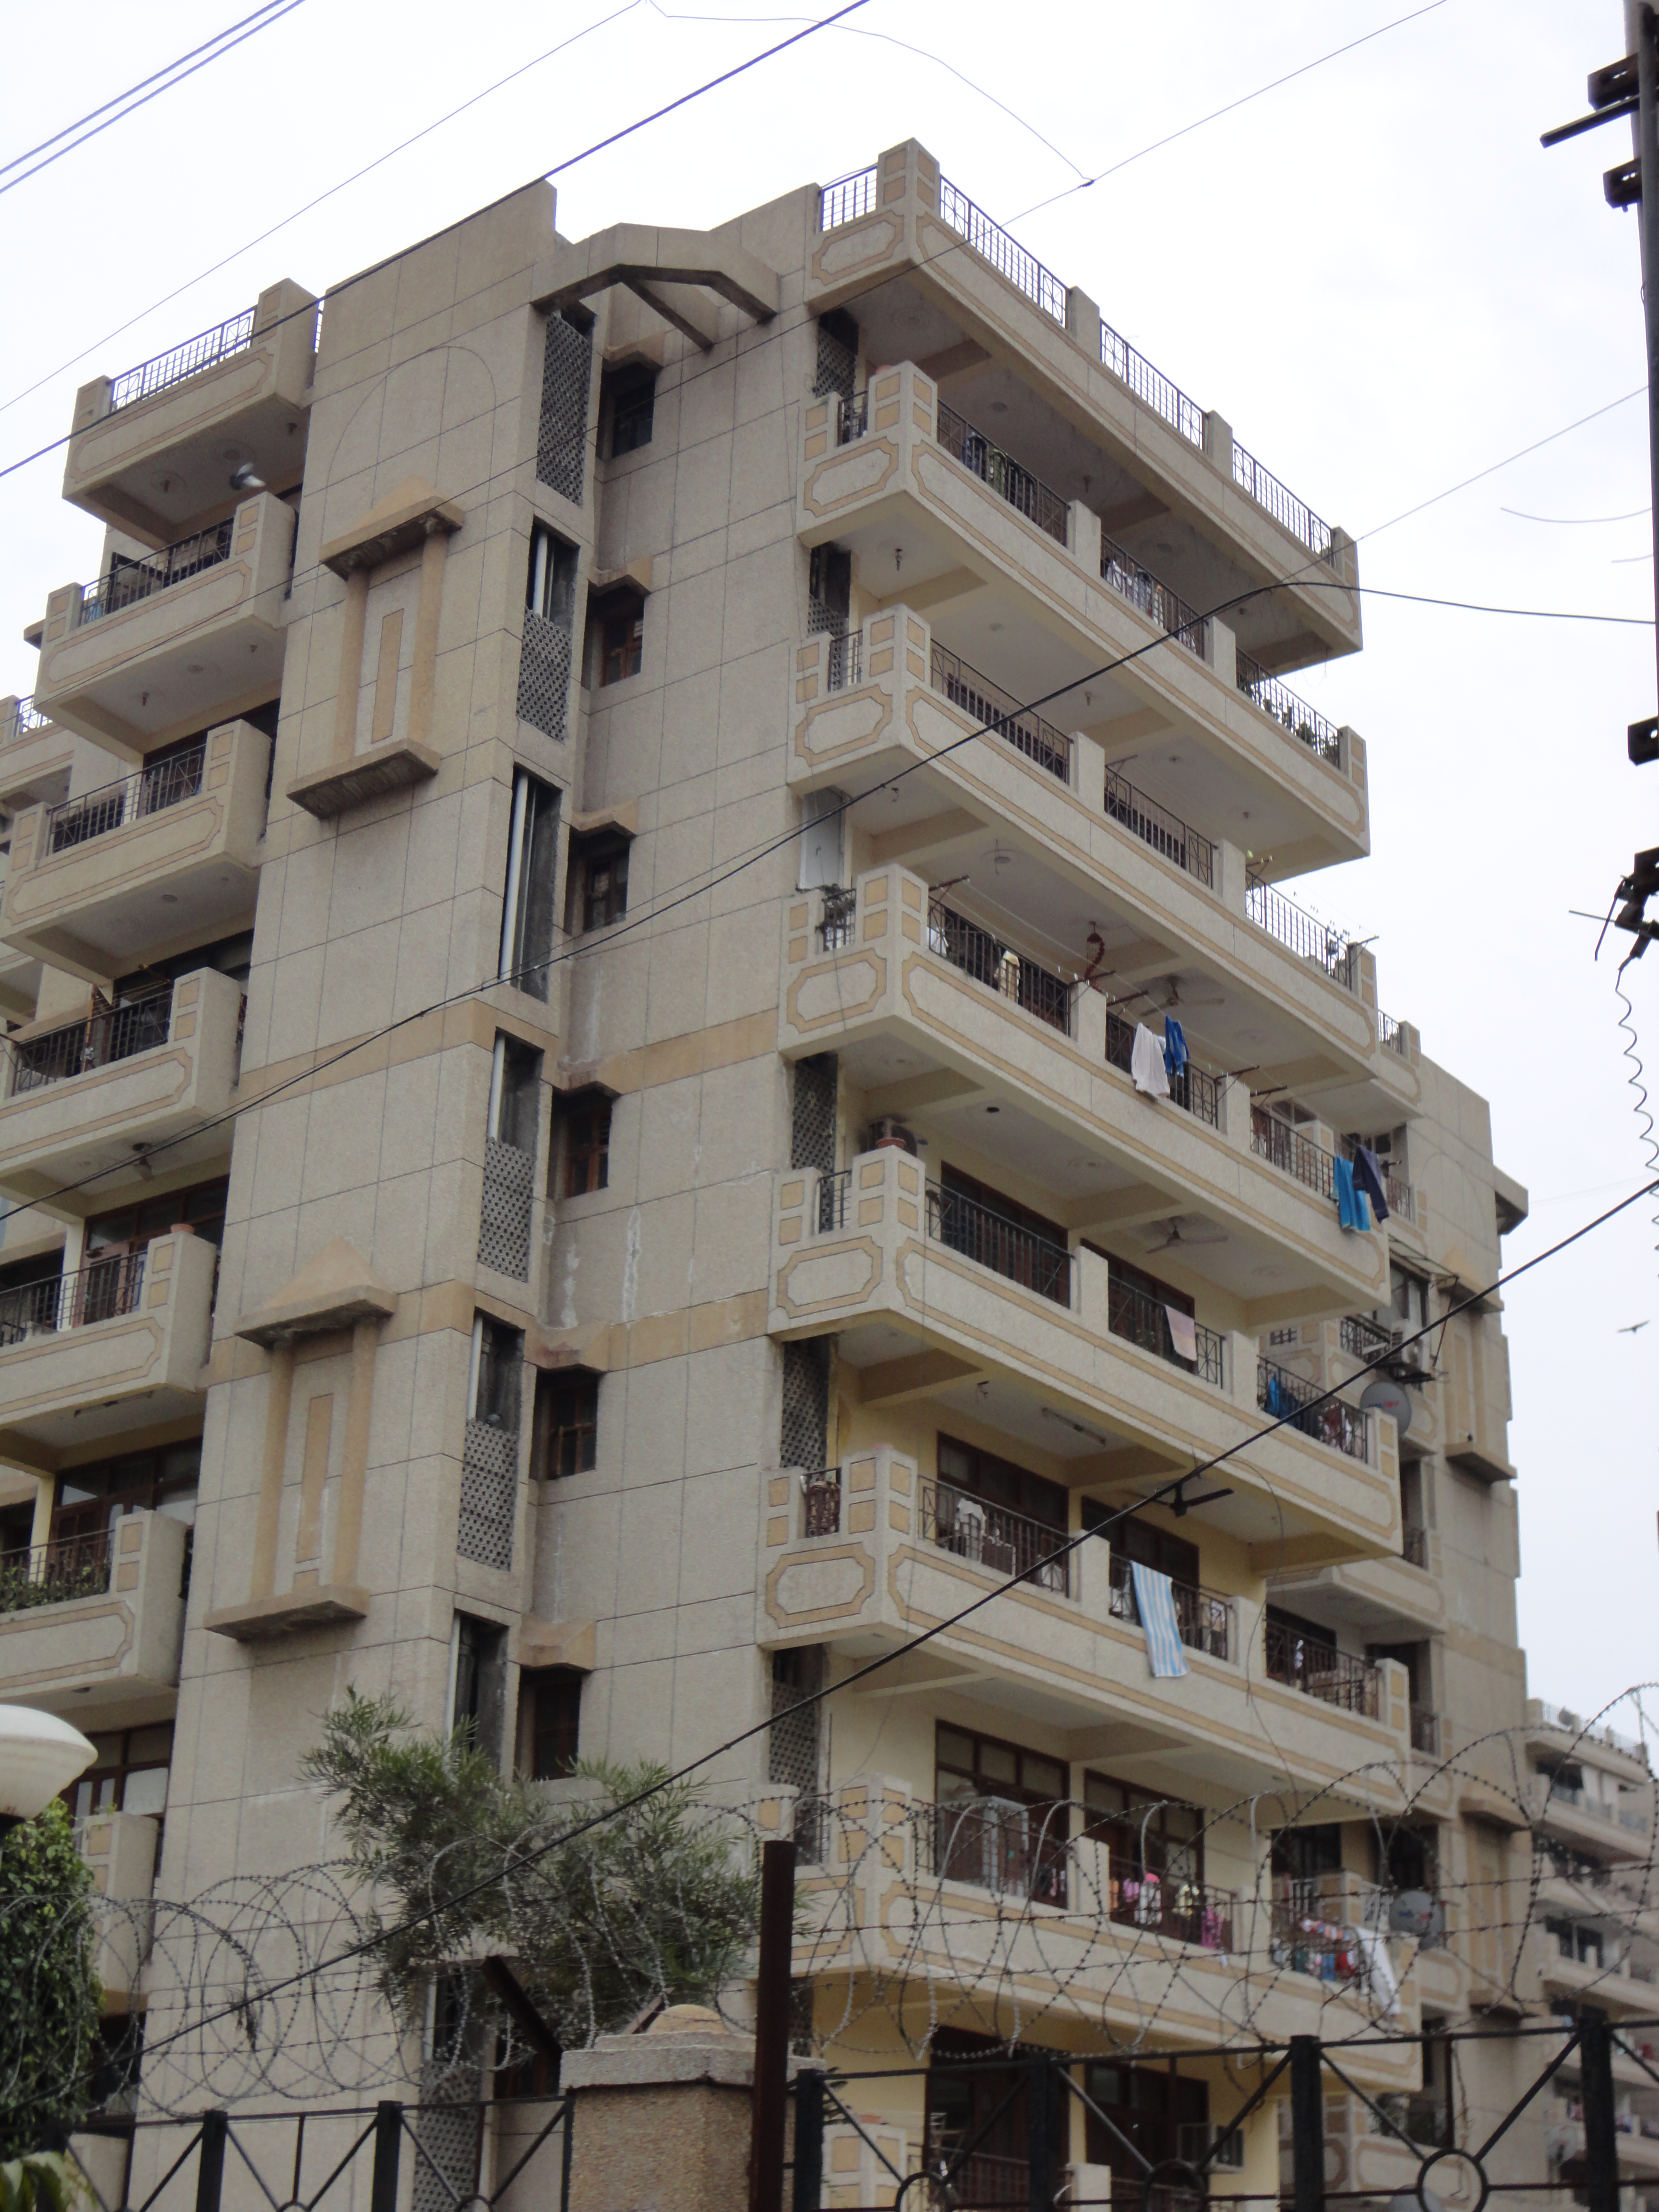 Alaknanda Apartments CGHS Project Deails